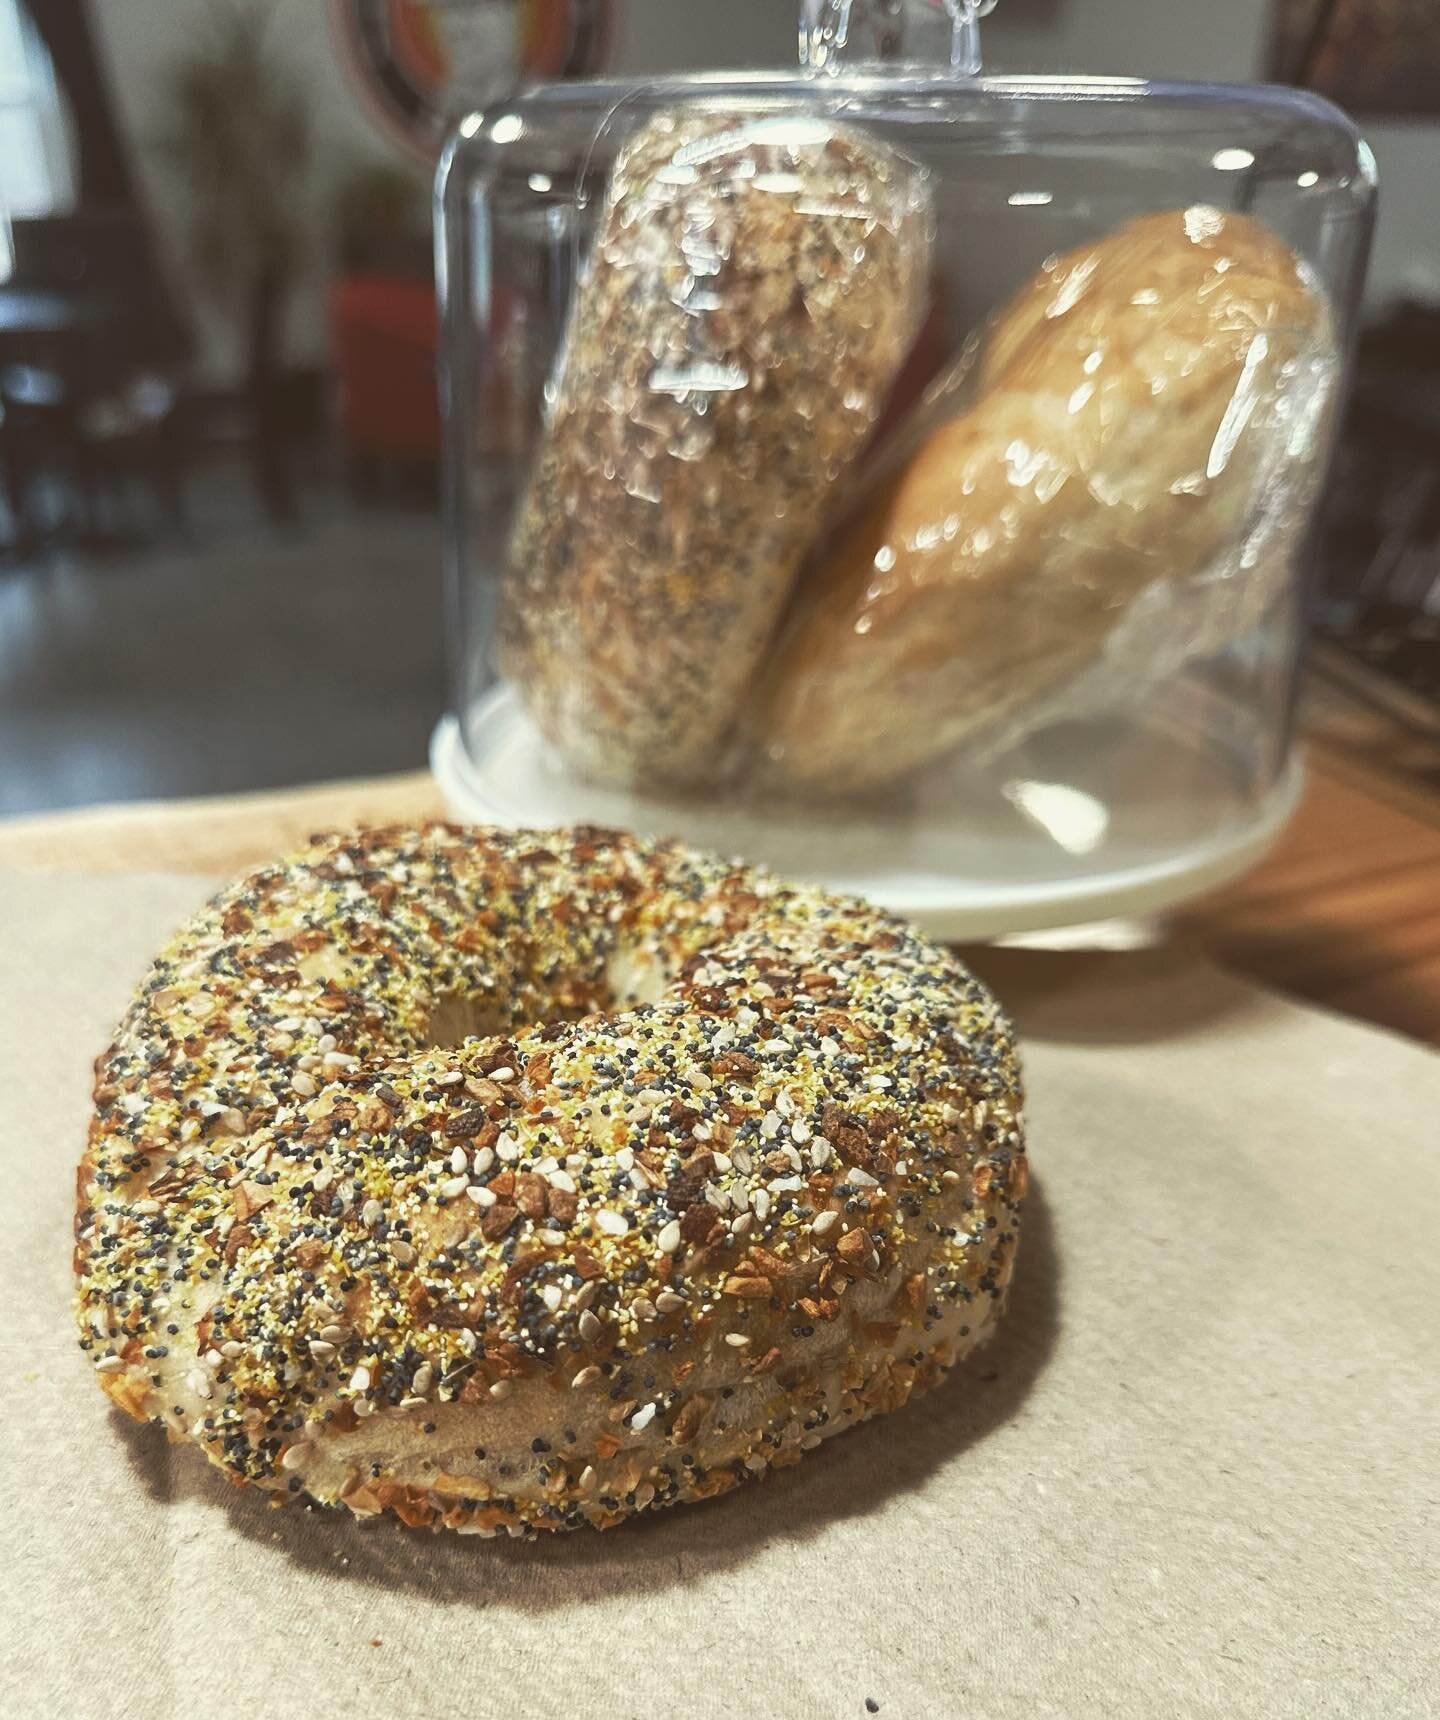 Bagels from @fancybagels everything and plain while supplies last!!! #ctlocalfood #ctlocalbusiness  #ctbreakfastclub  #ctbreakfast  #ctdeli  #ctdelis #ct #harwintonct #ctunionville #collinsvillect #breakfast&ccedil;t